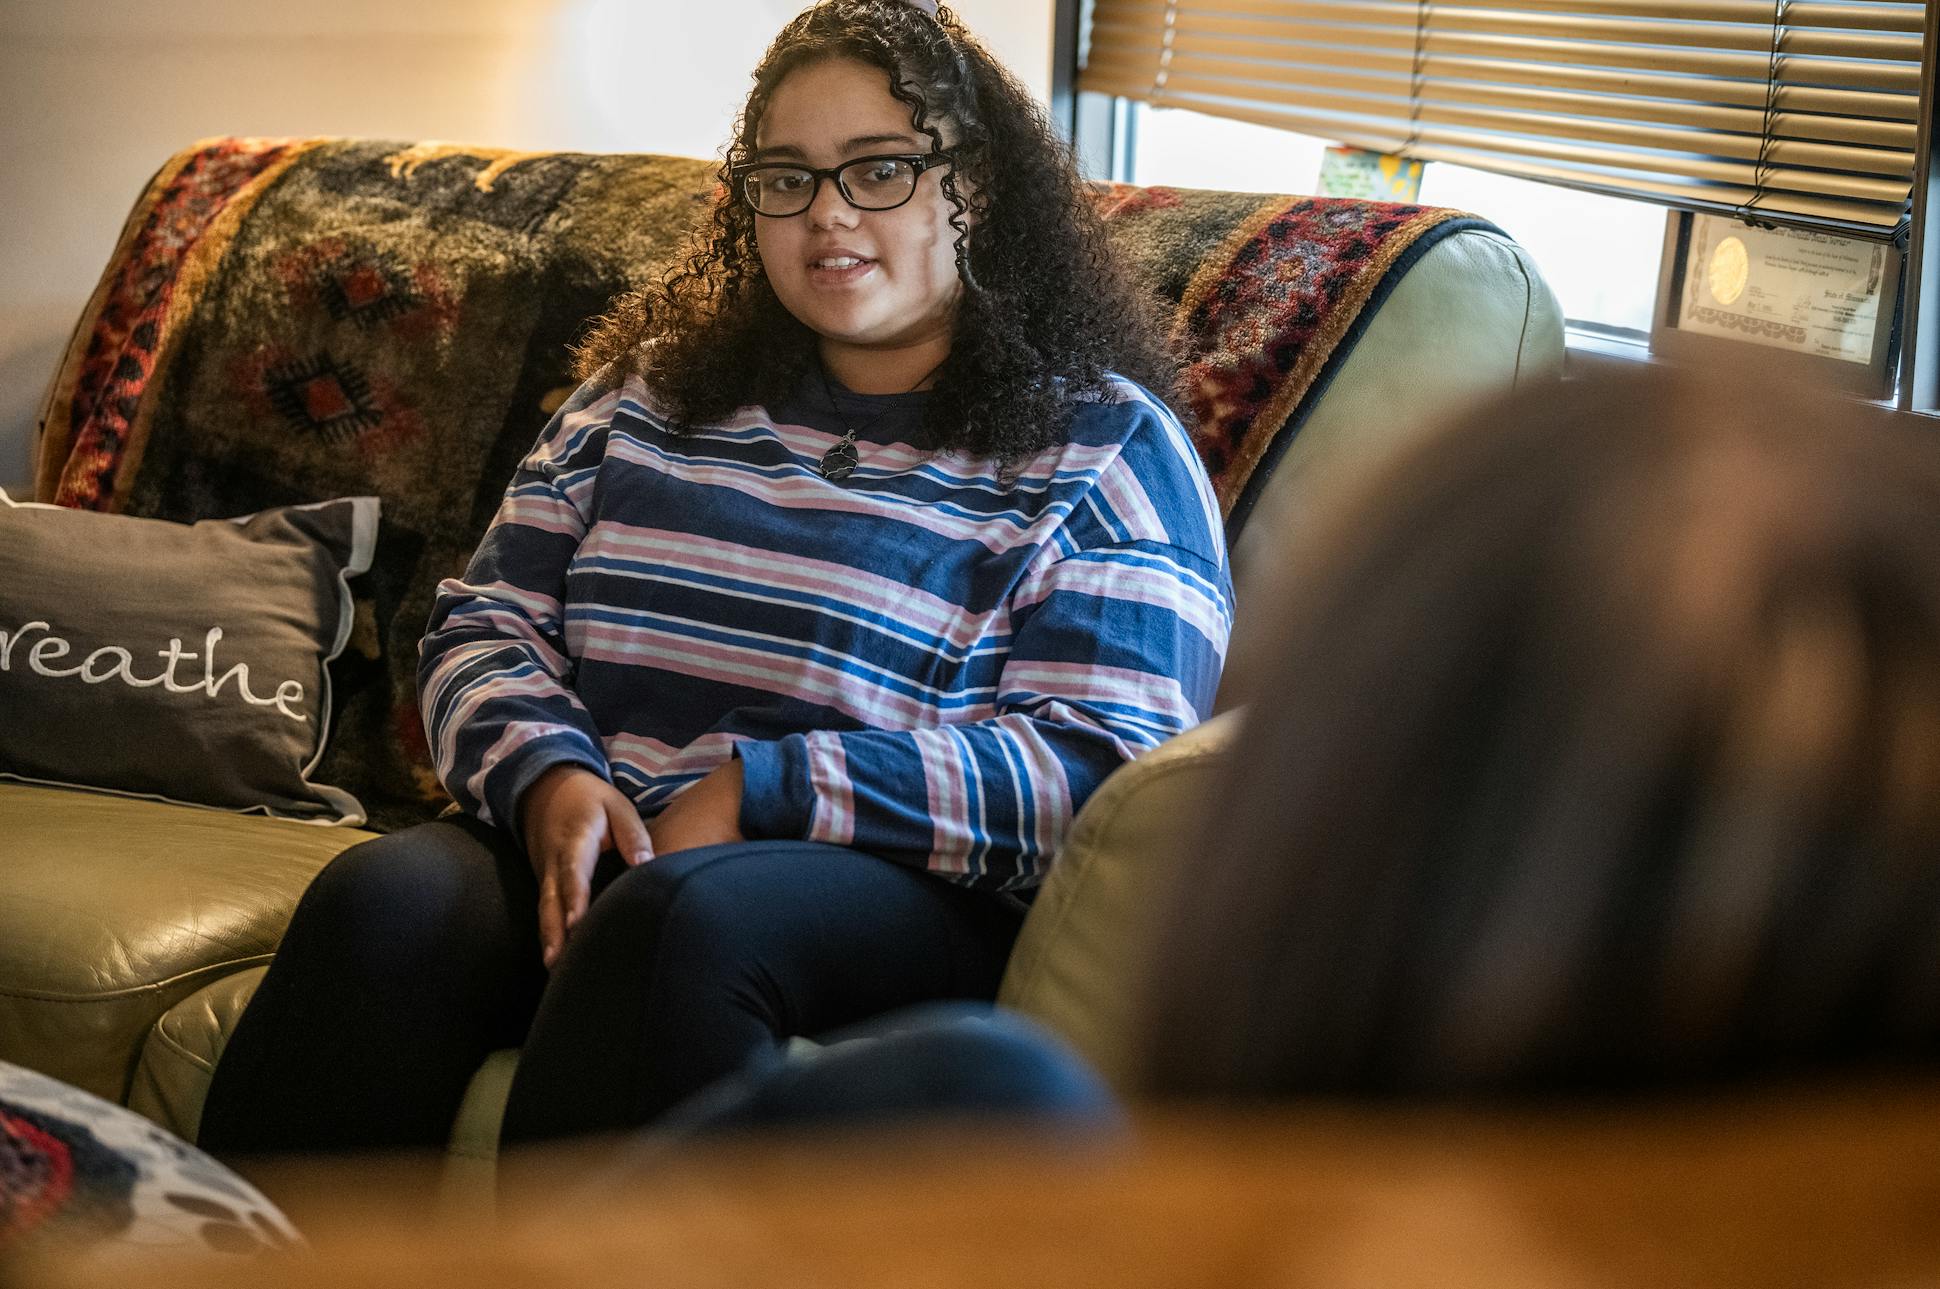 Leinani Watson is now happy with her mental health care. But she struggled to find the right program and provider.